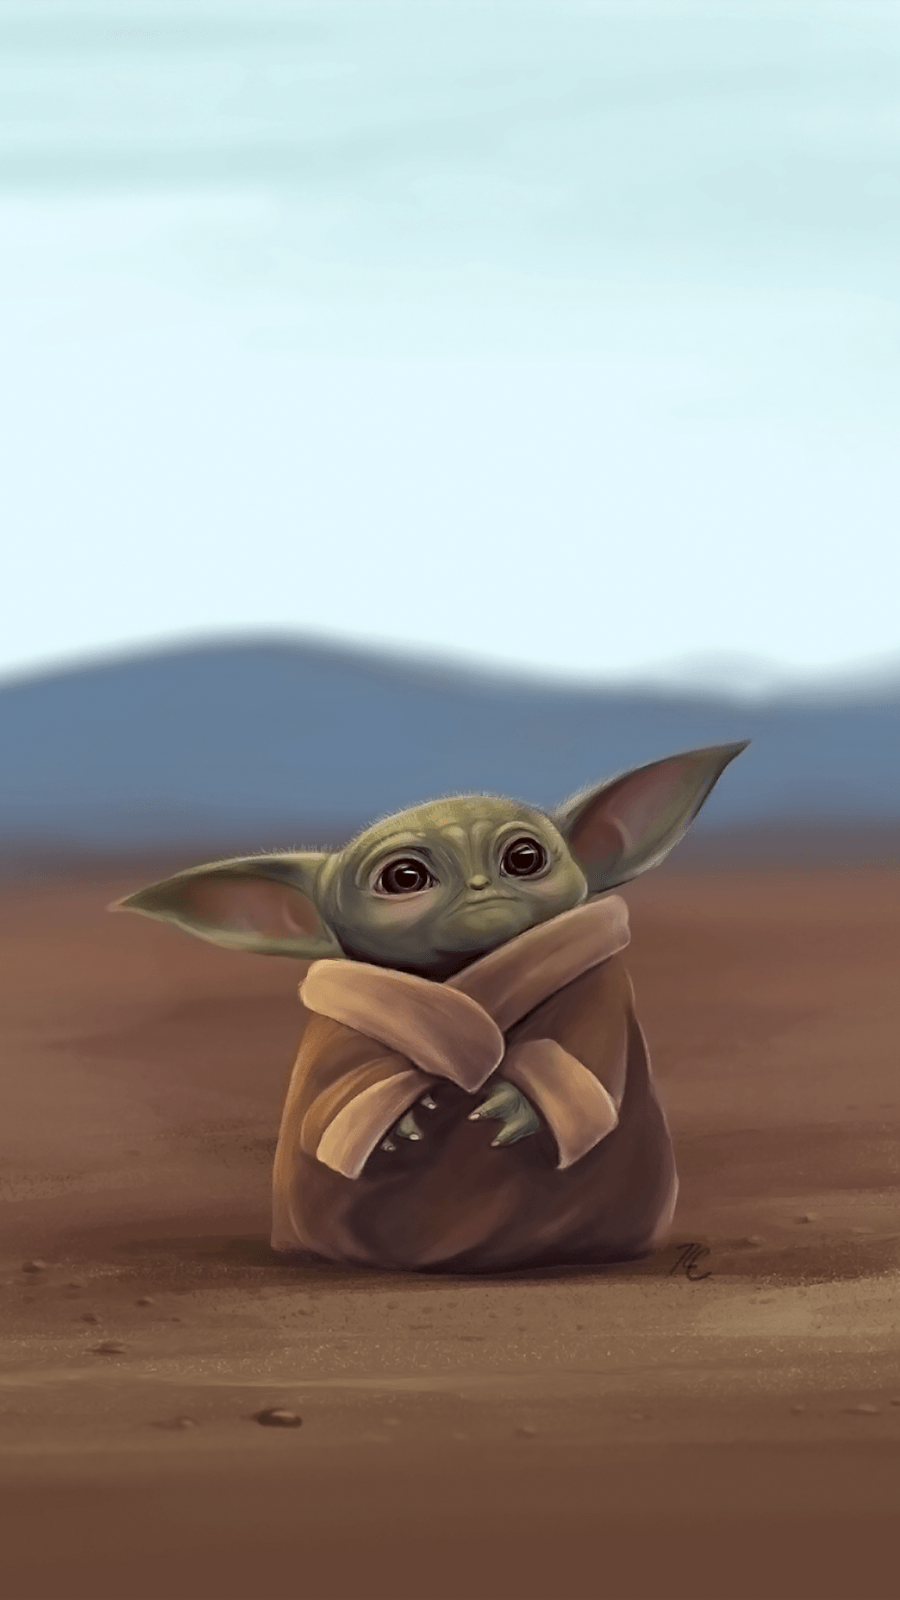 The child Baby Yoda phone wallpaper collection. Cool Wallpaper.cc. Yoda wallpaper, Yoda art, Yoda image